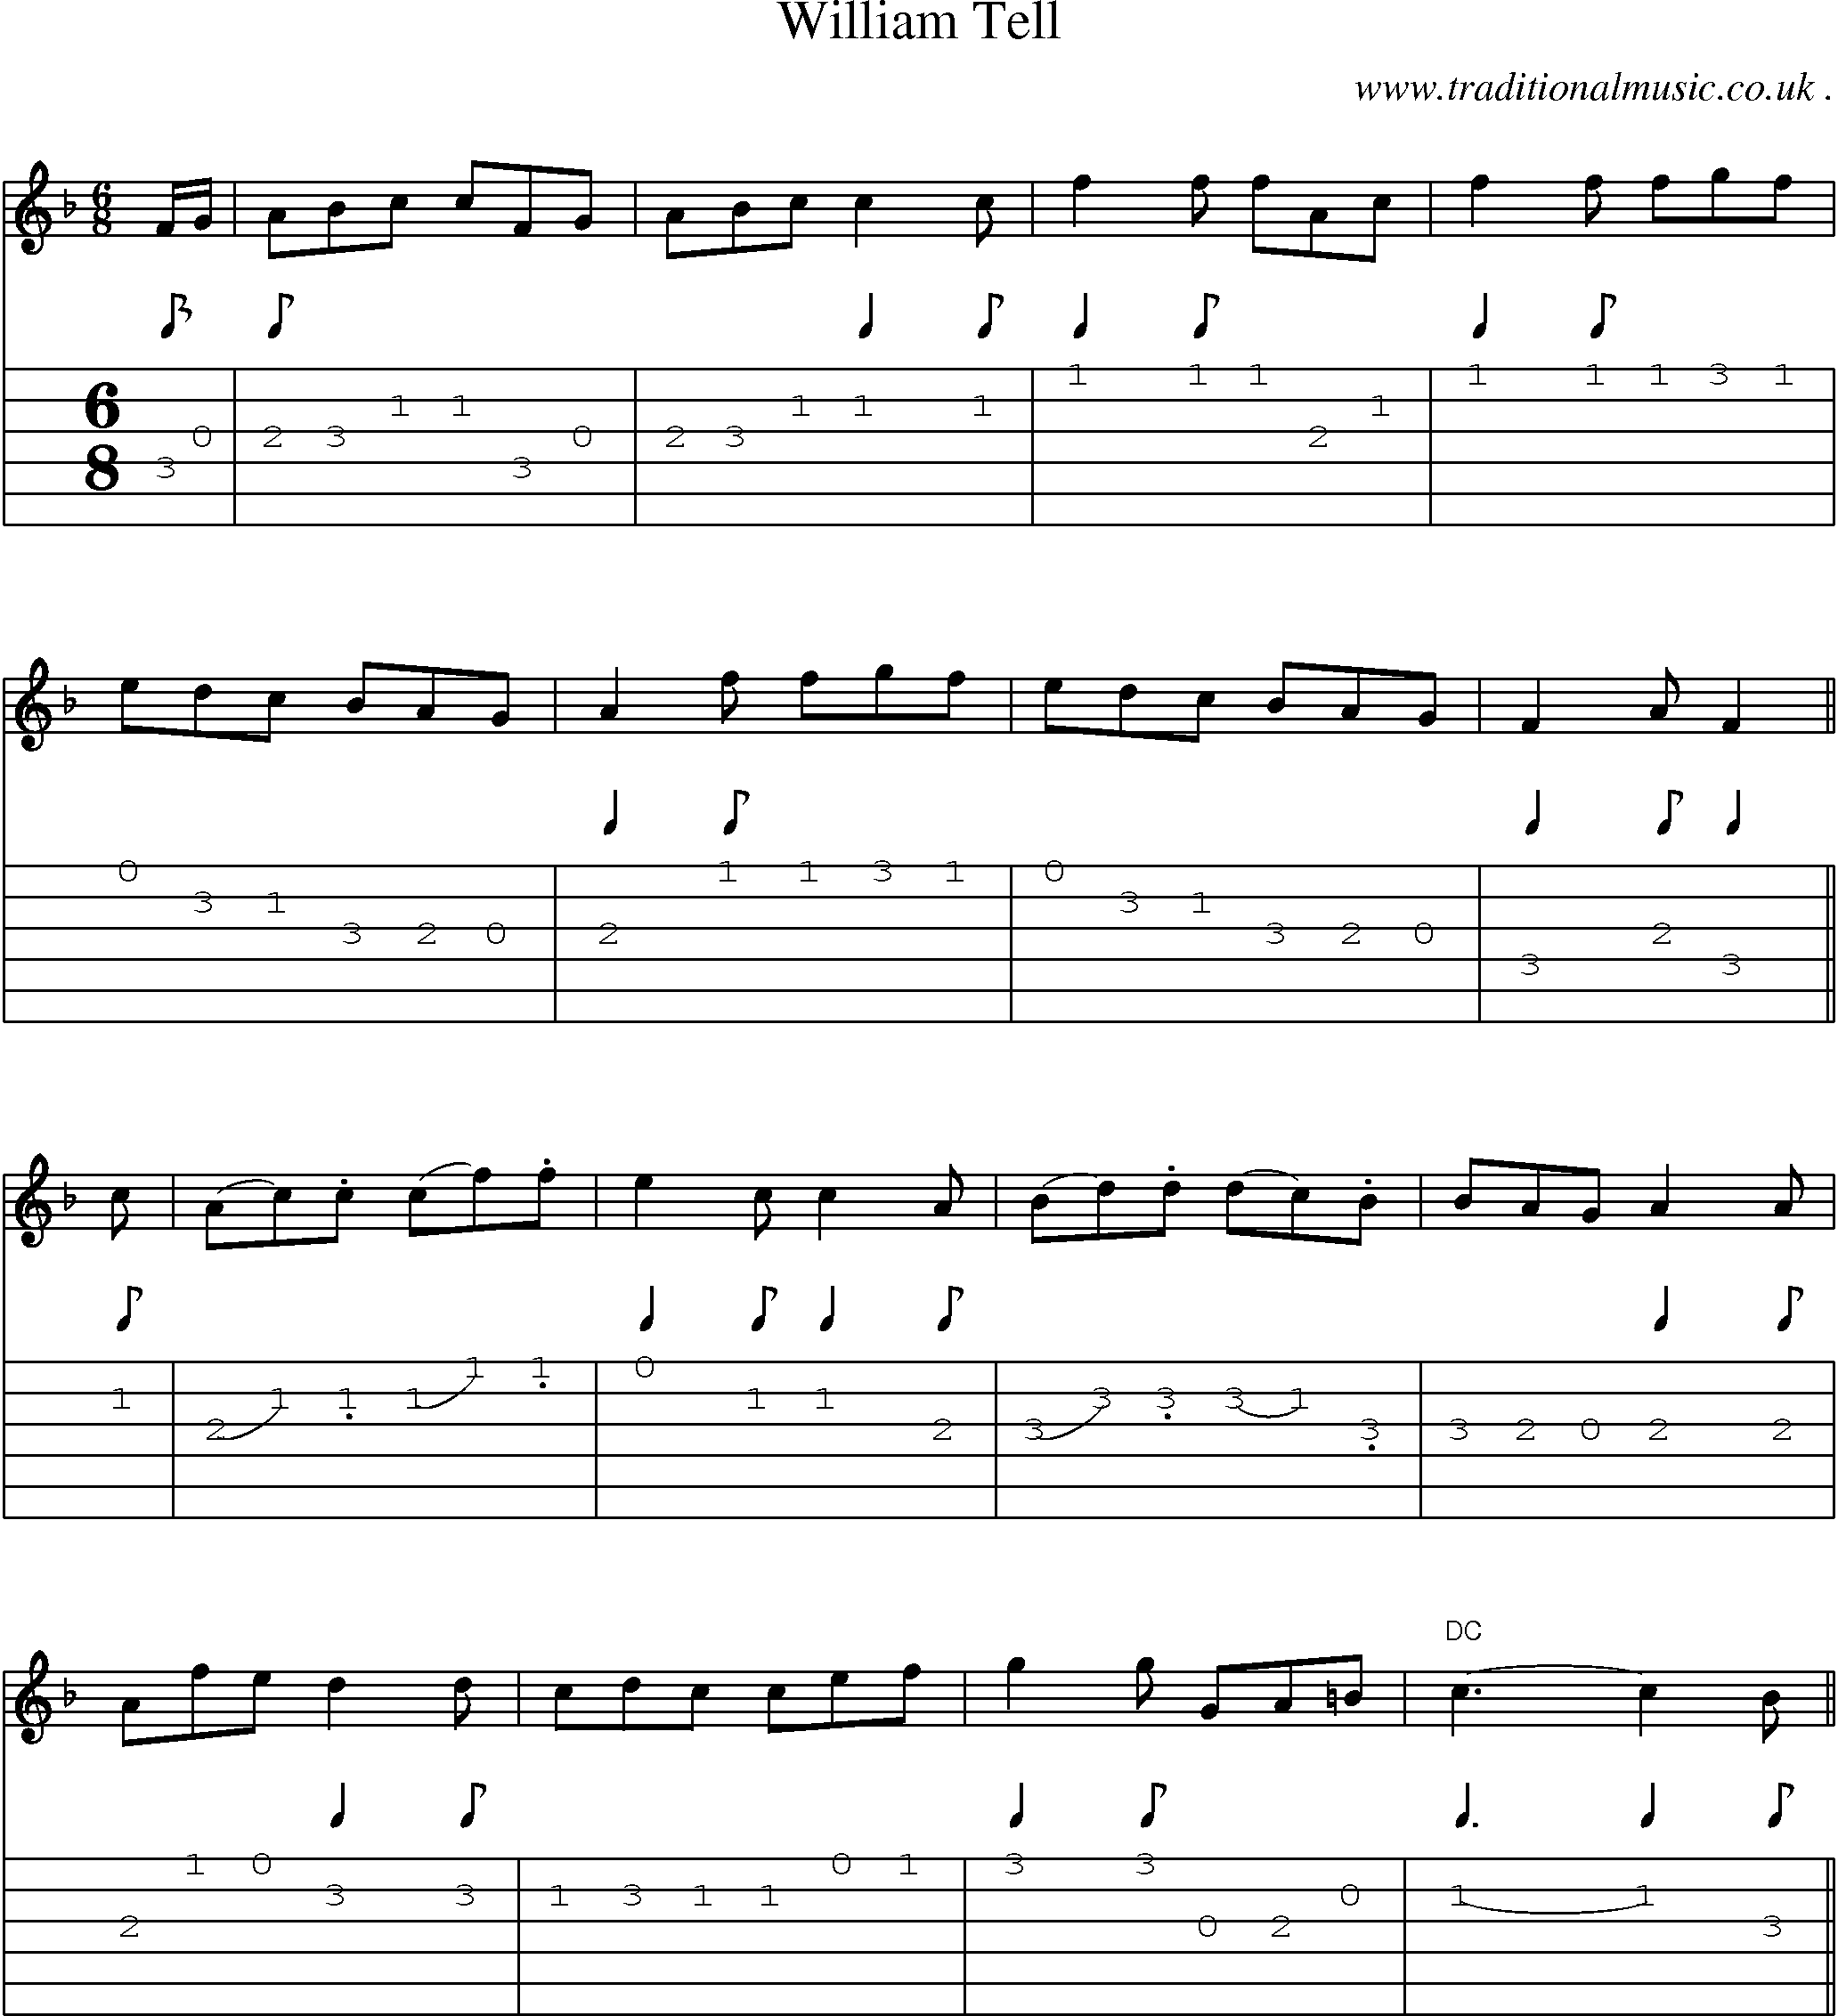 Sheet-Music and Guitar Tabs for William Tell